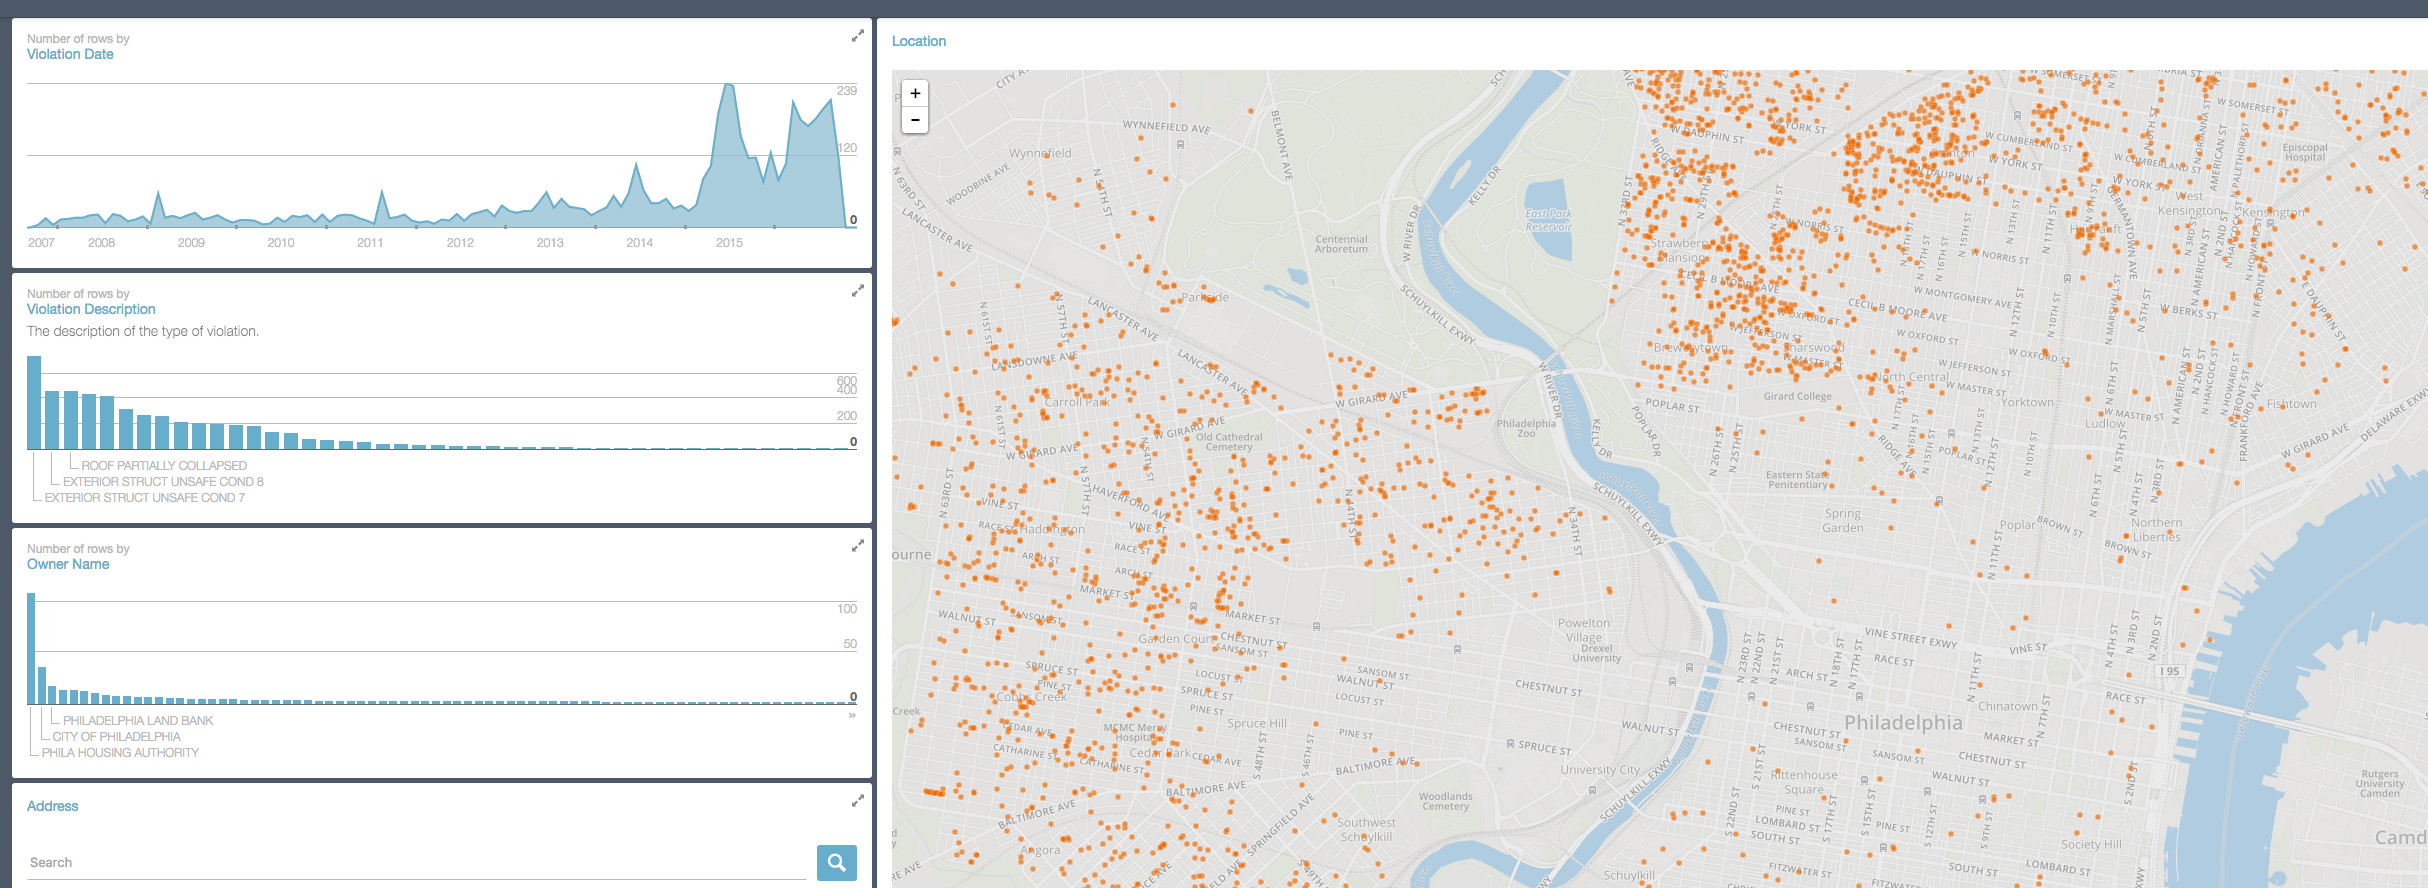 New L&I tool to visualize 'unsafe' properties is part of departmental data release, upgrades